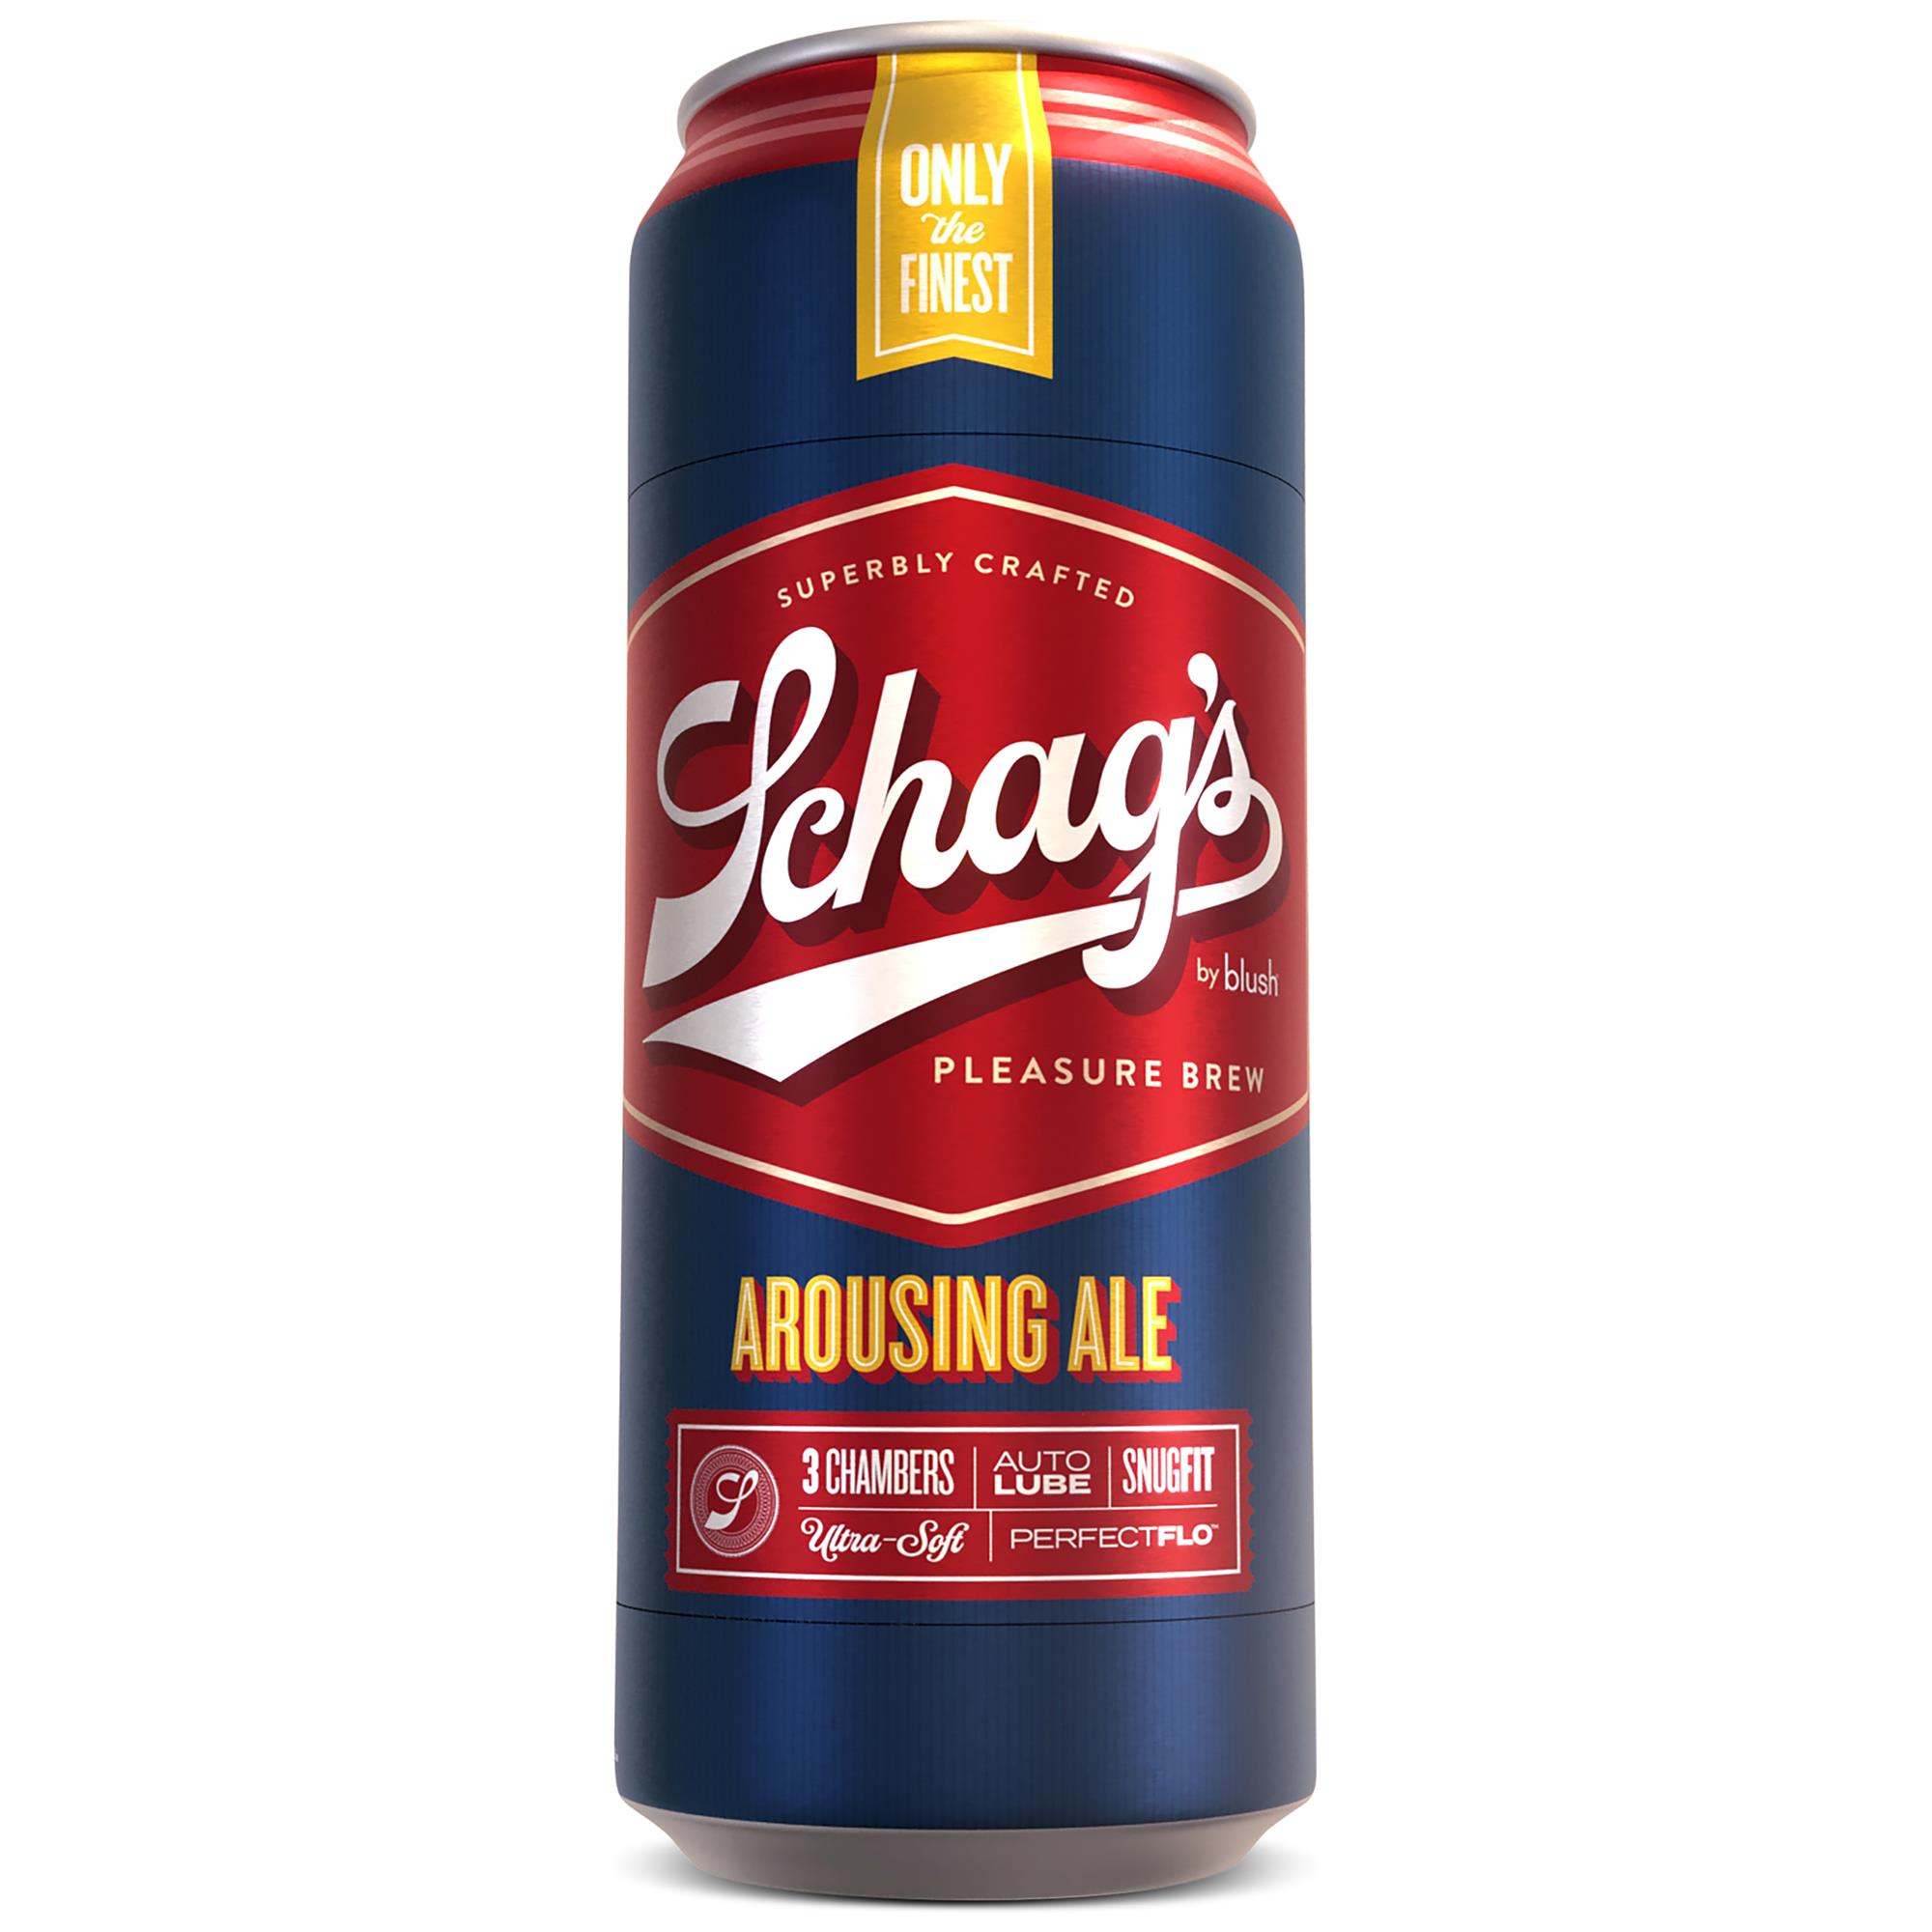 Schags Arousing Ale Frosted